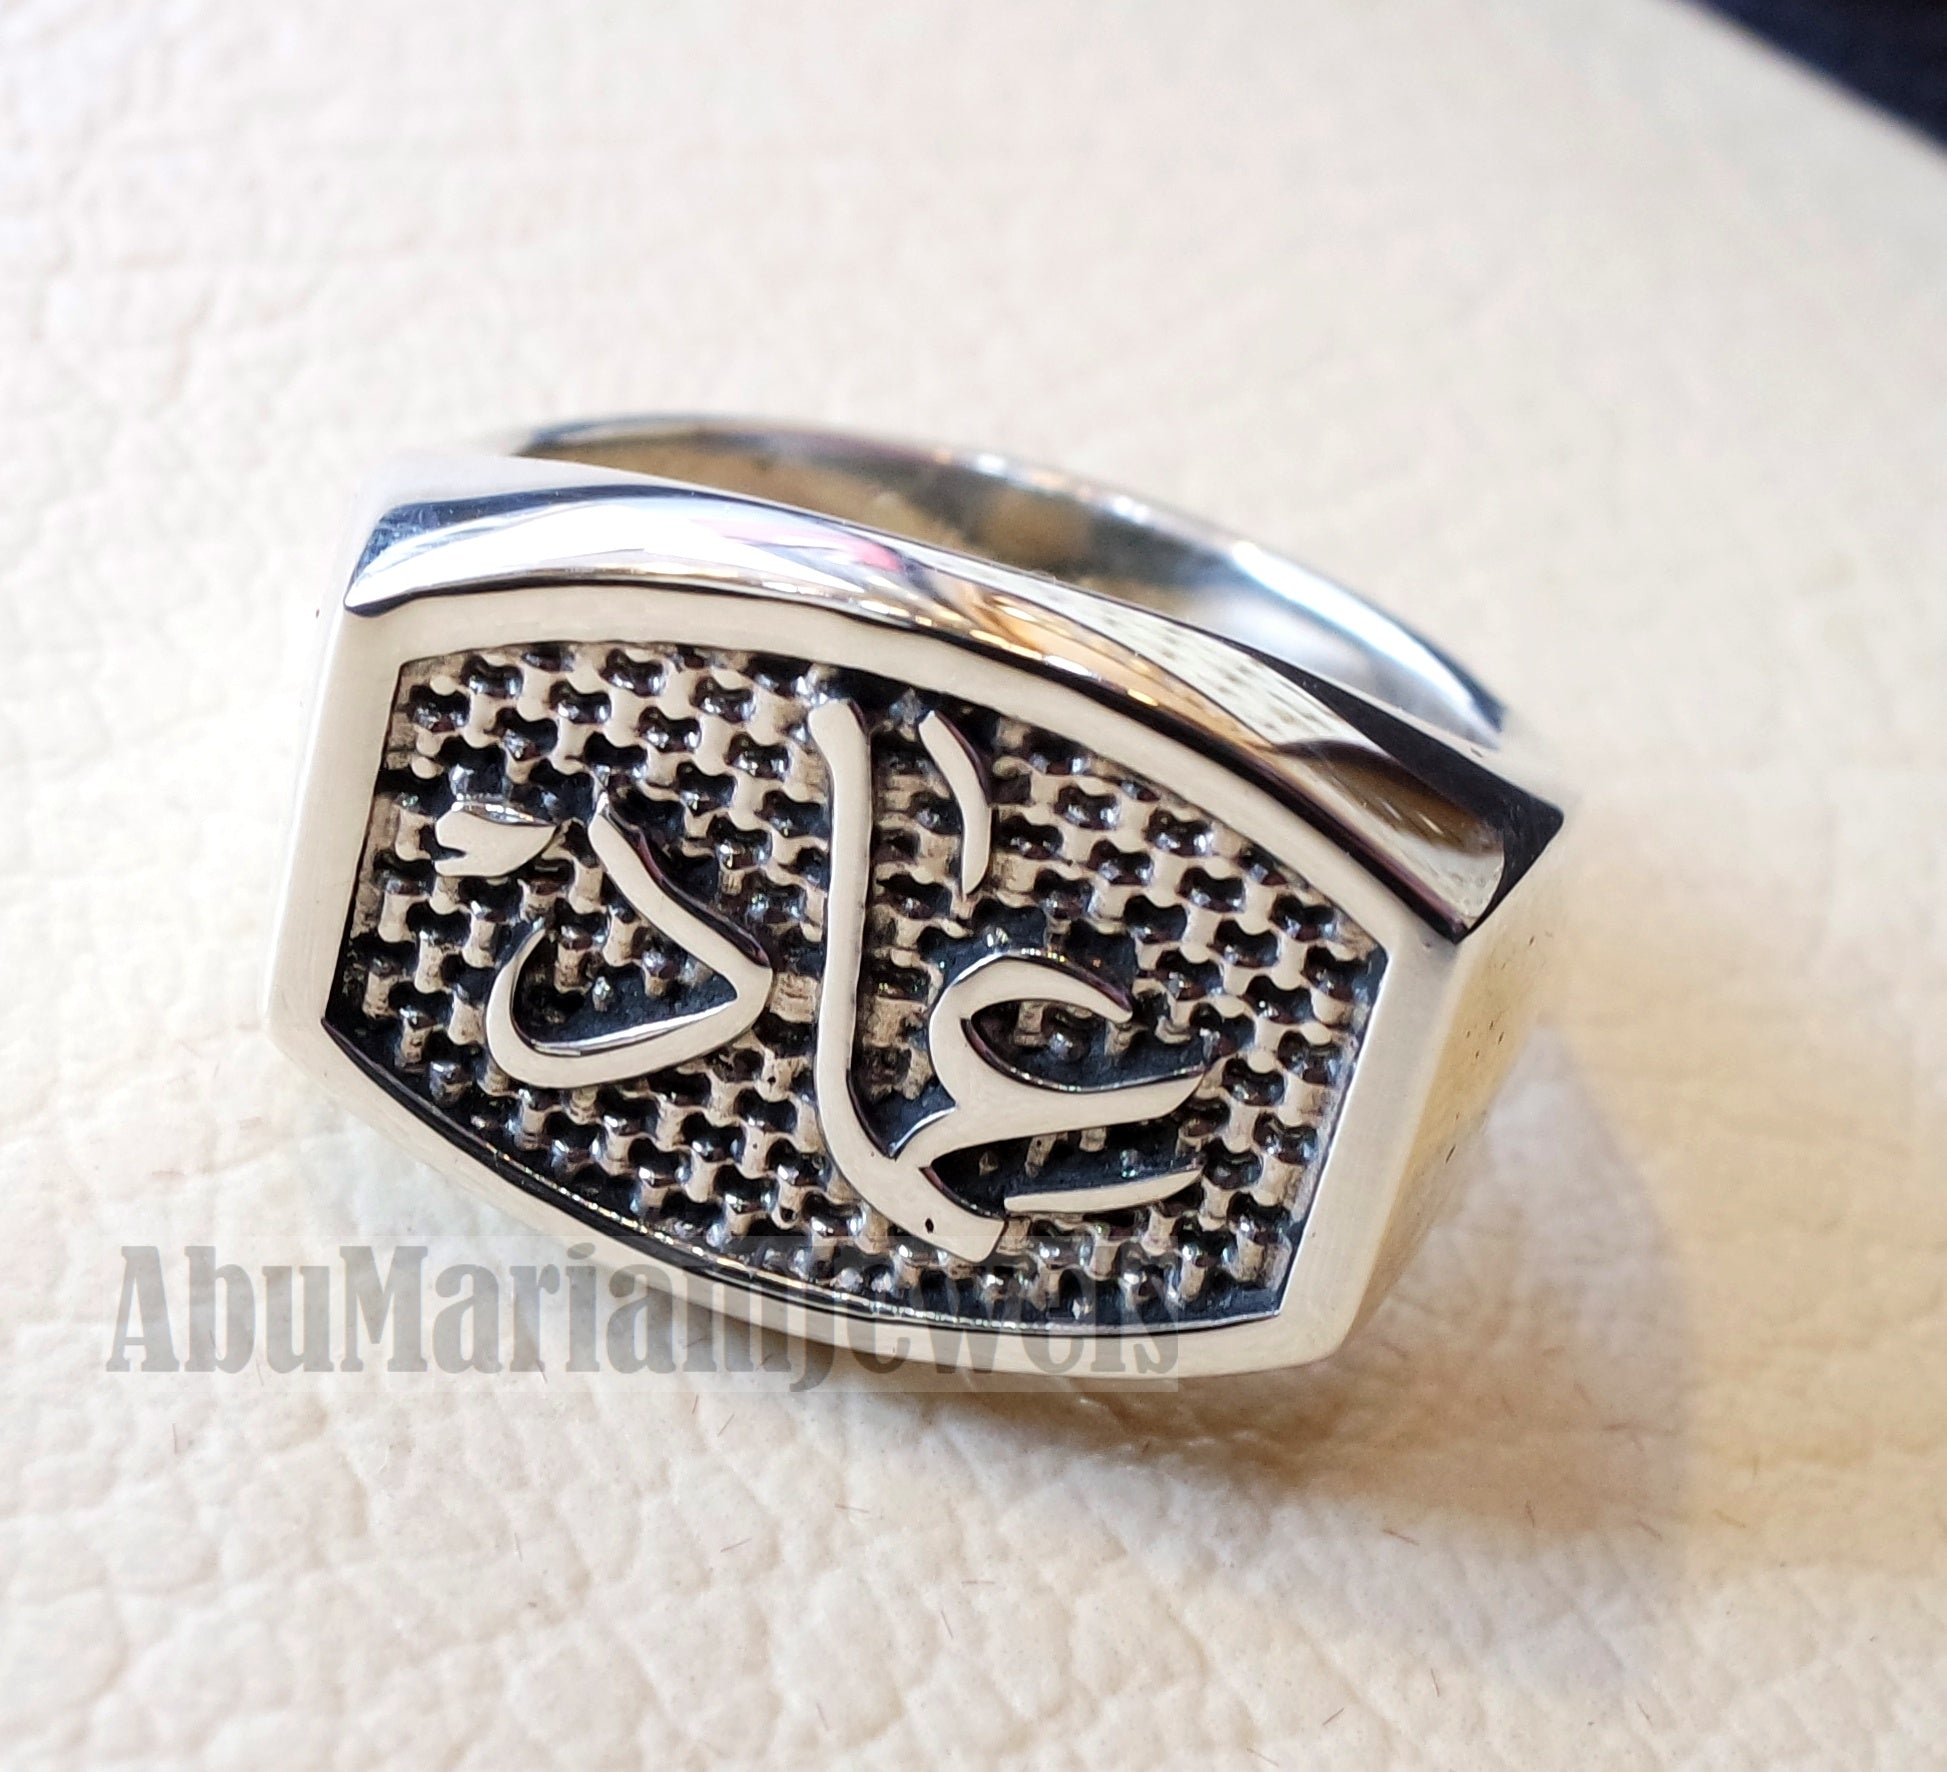 Name ring customized Arabic calligraphy one word personalized heavy all sizes jewelry style sterling silver 925 SN1004 خاتم اسم تفصيل